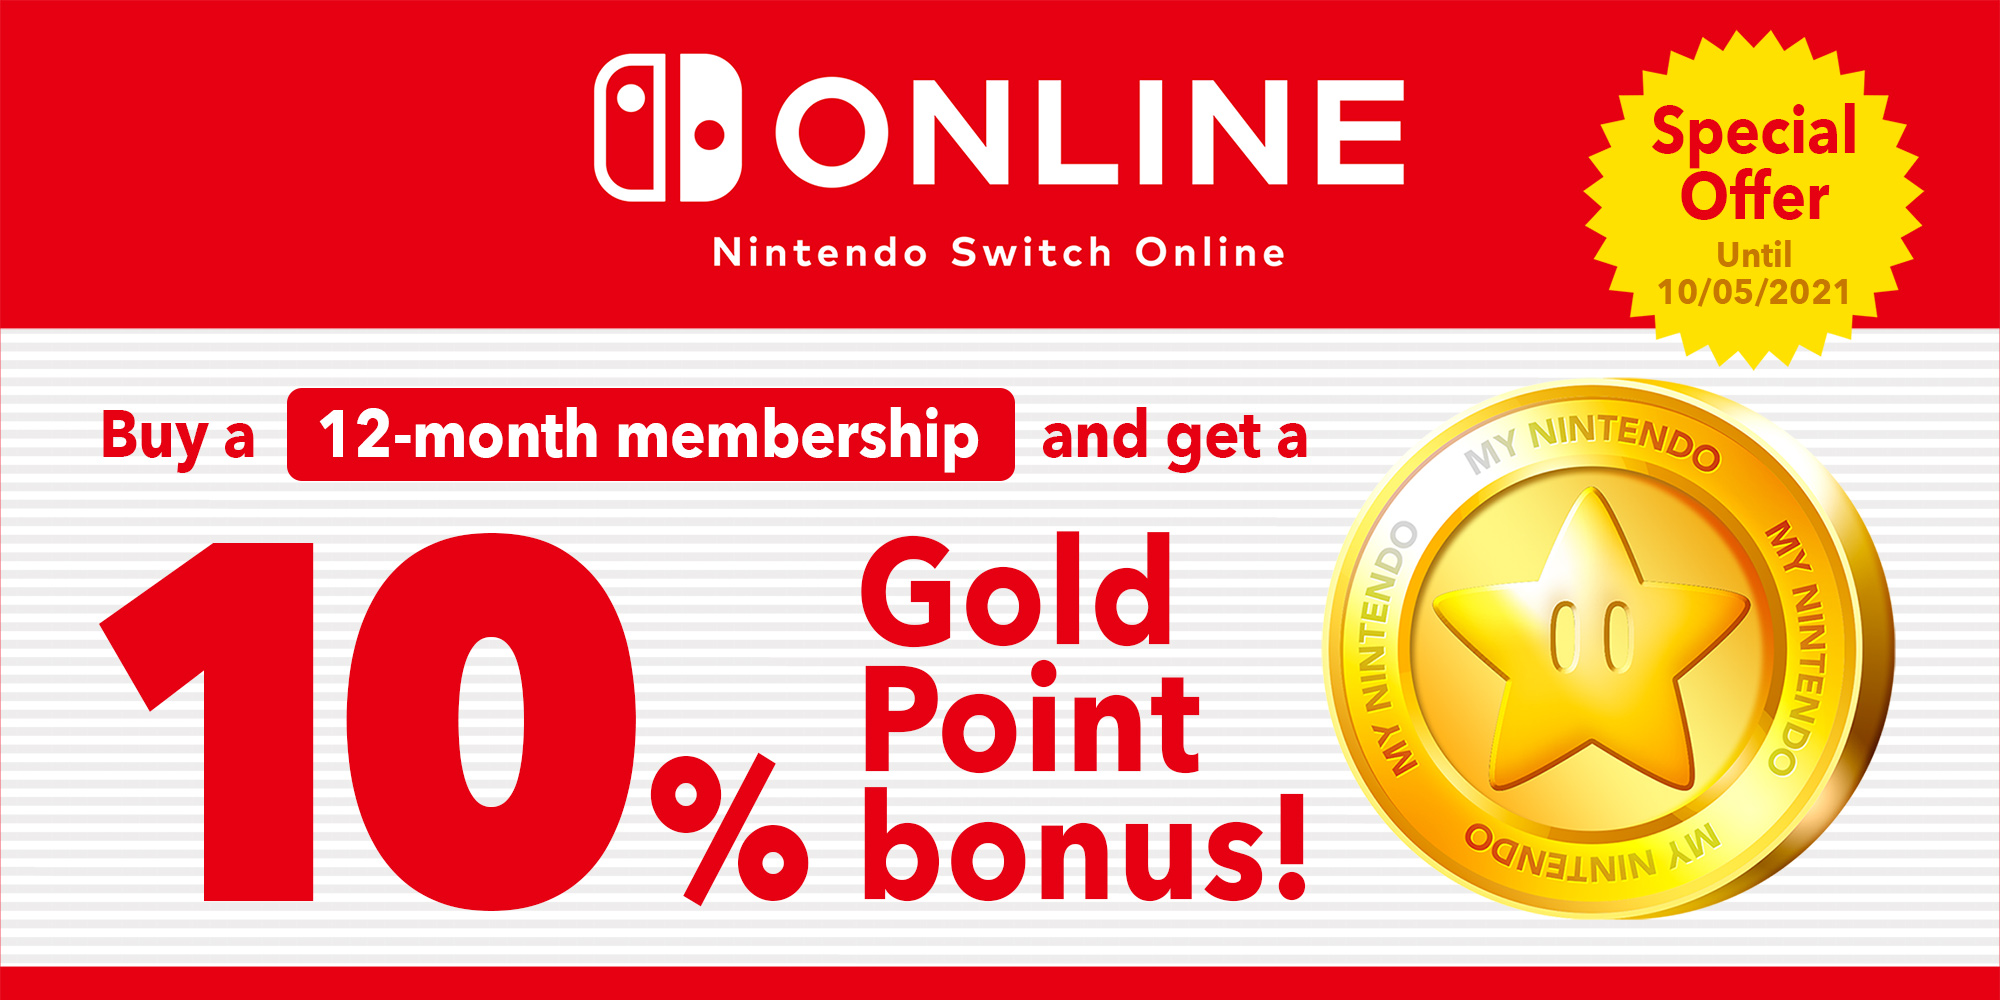 Special Earn up £3.15/€3.50 in Gold Points with a 12-month Nintendo Online membership! News | Nintendo